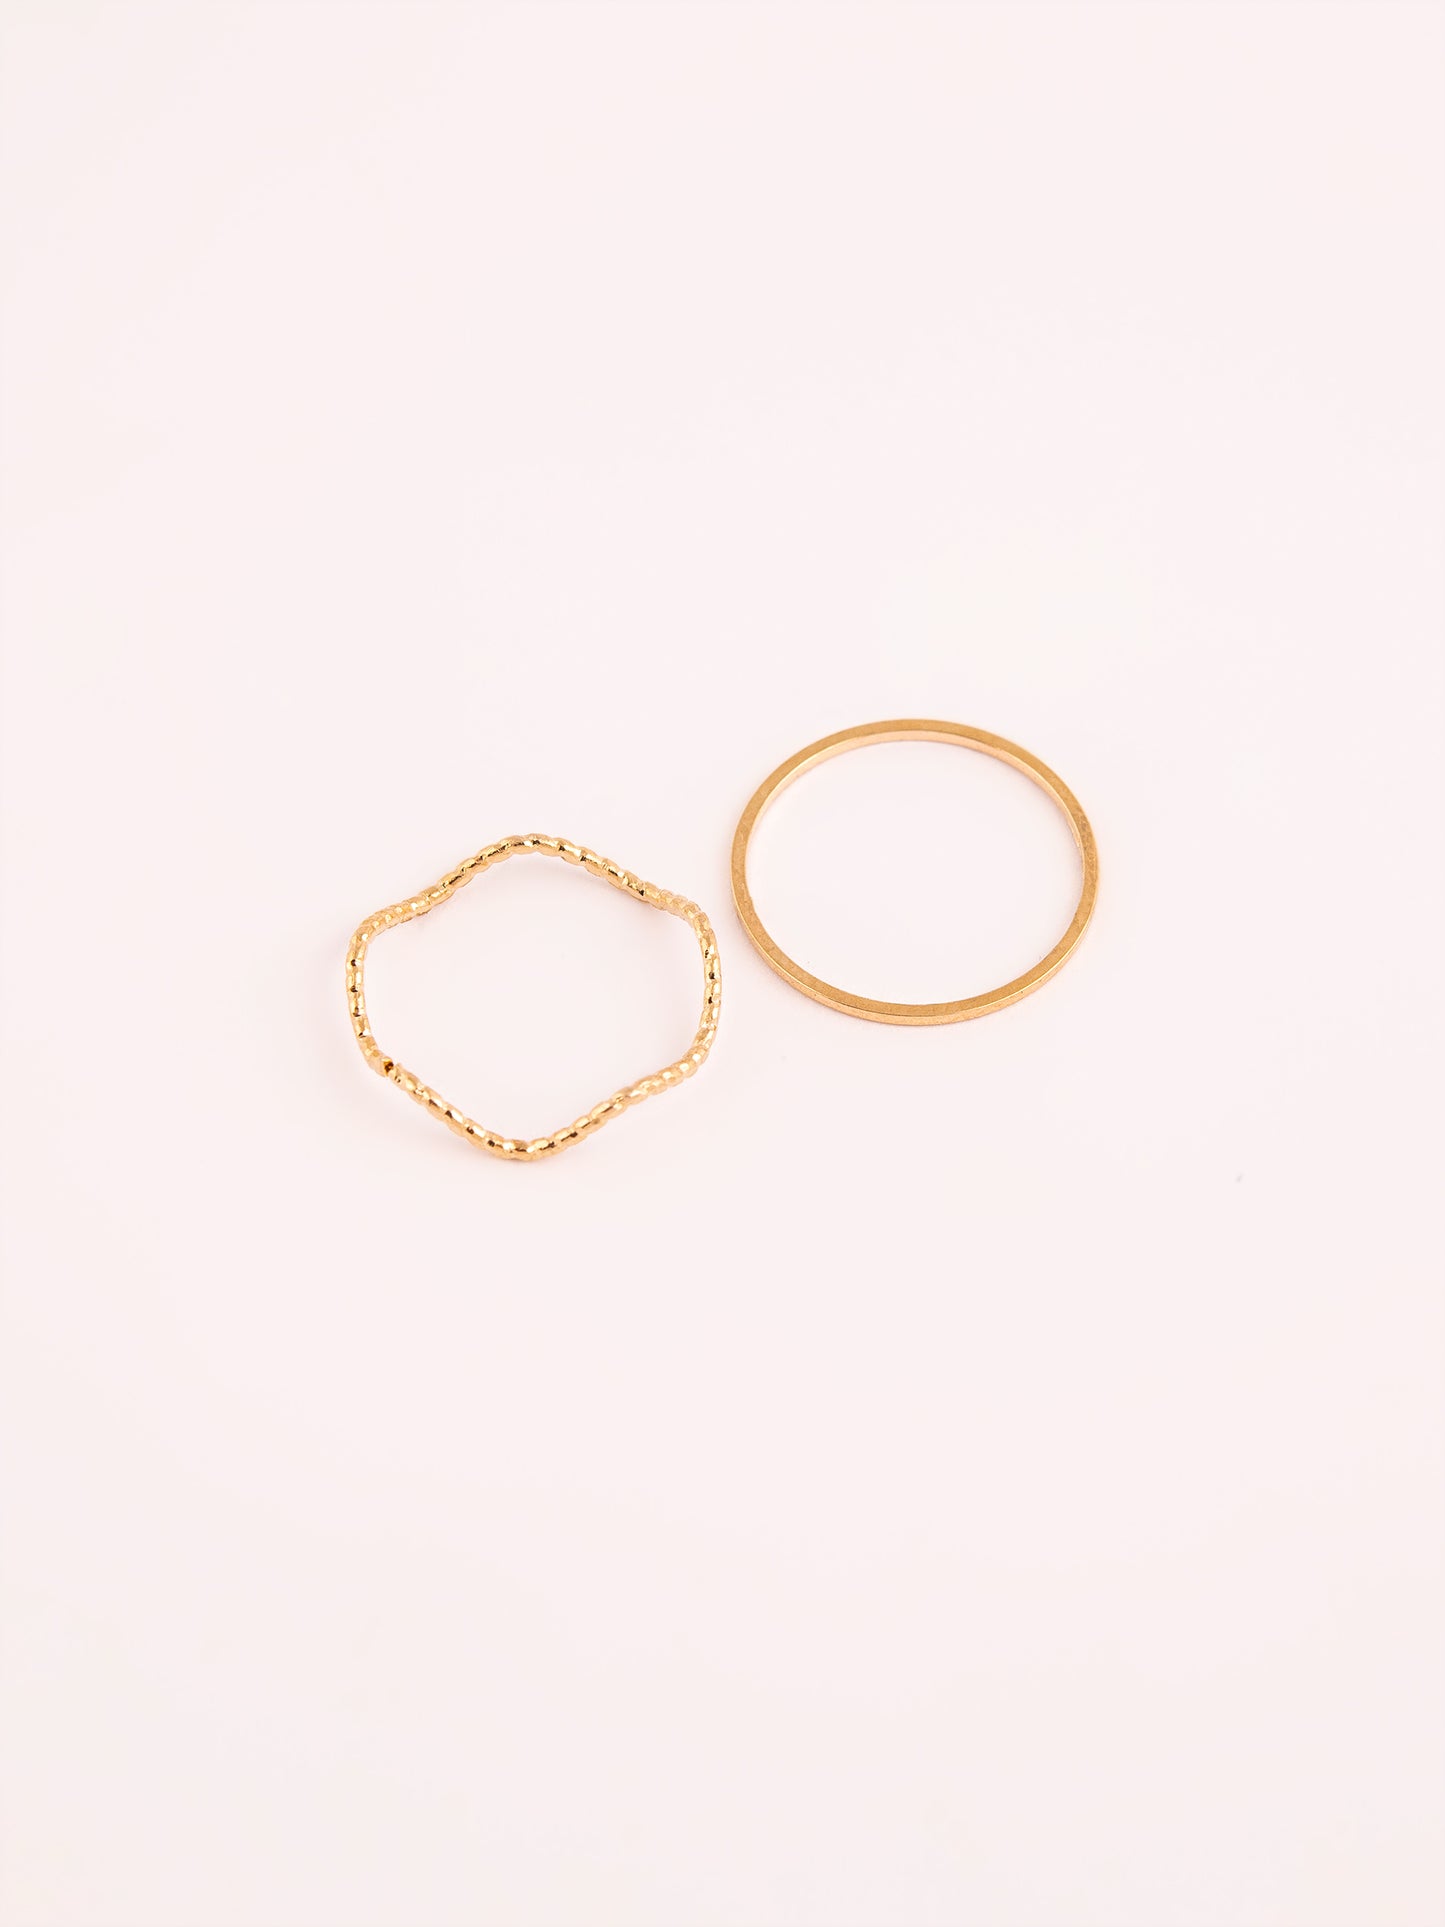 Contemporary Gold Ring Set